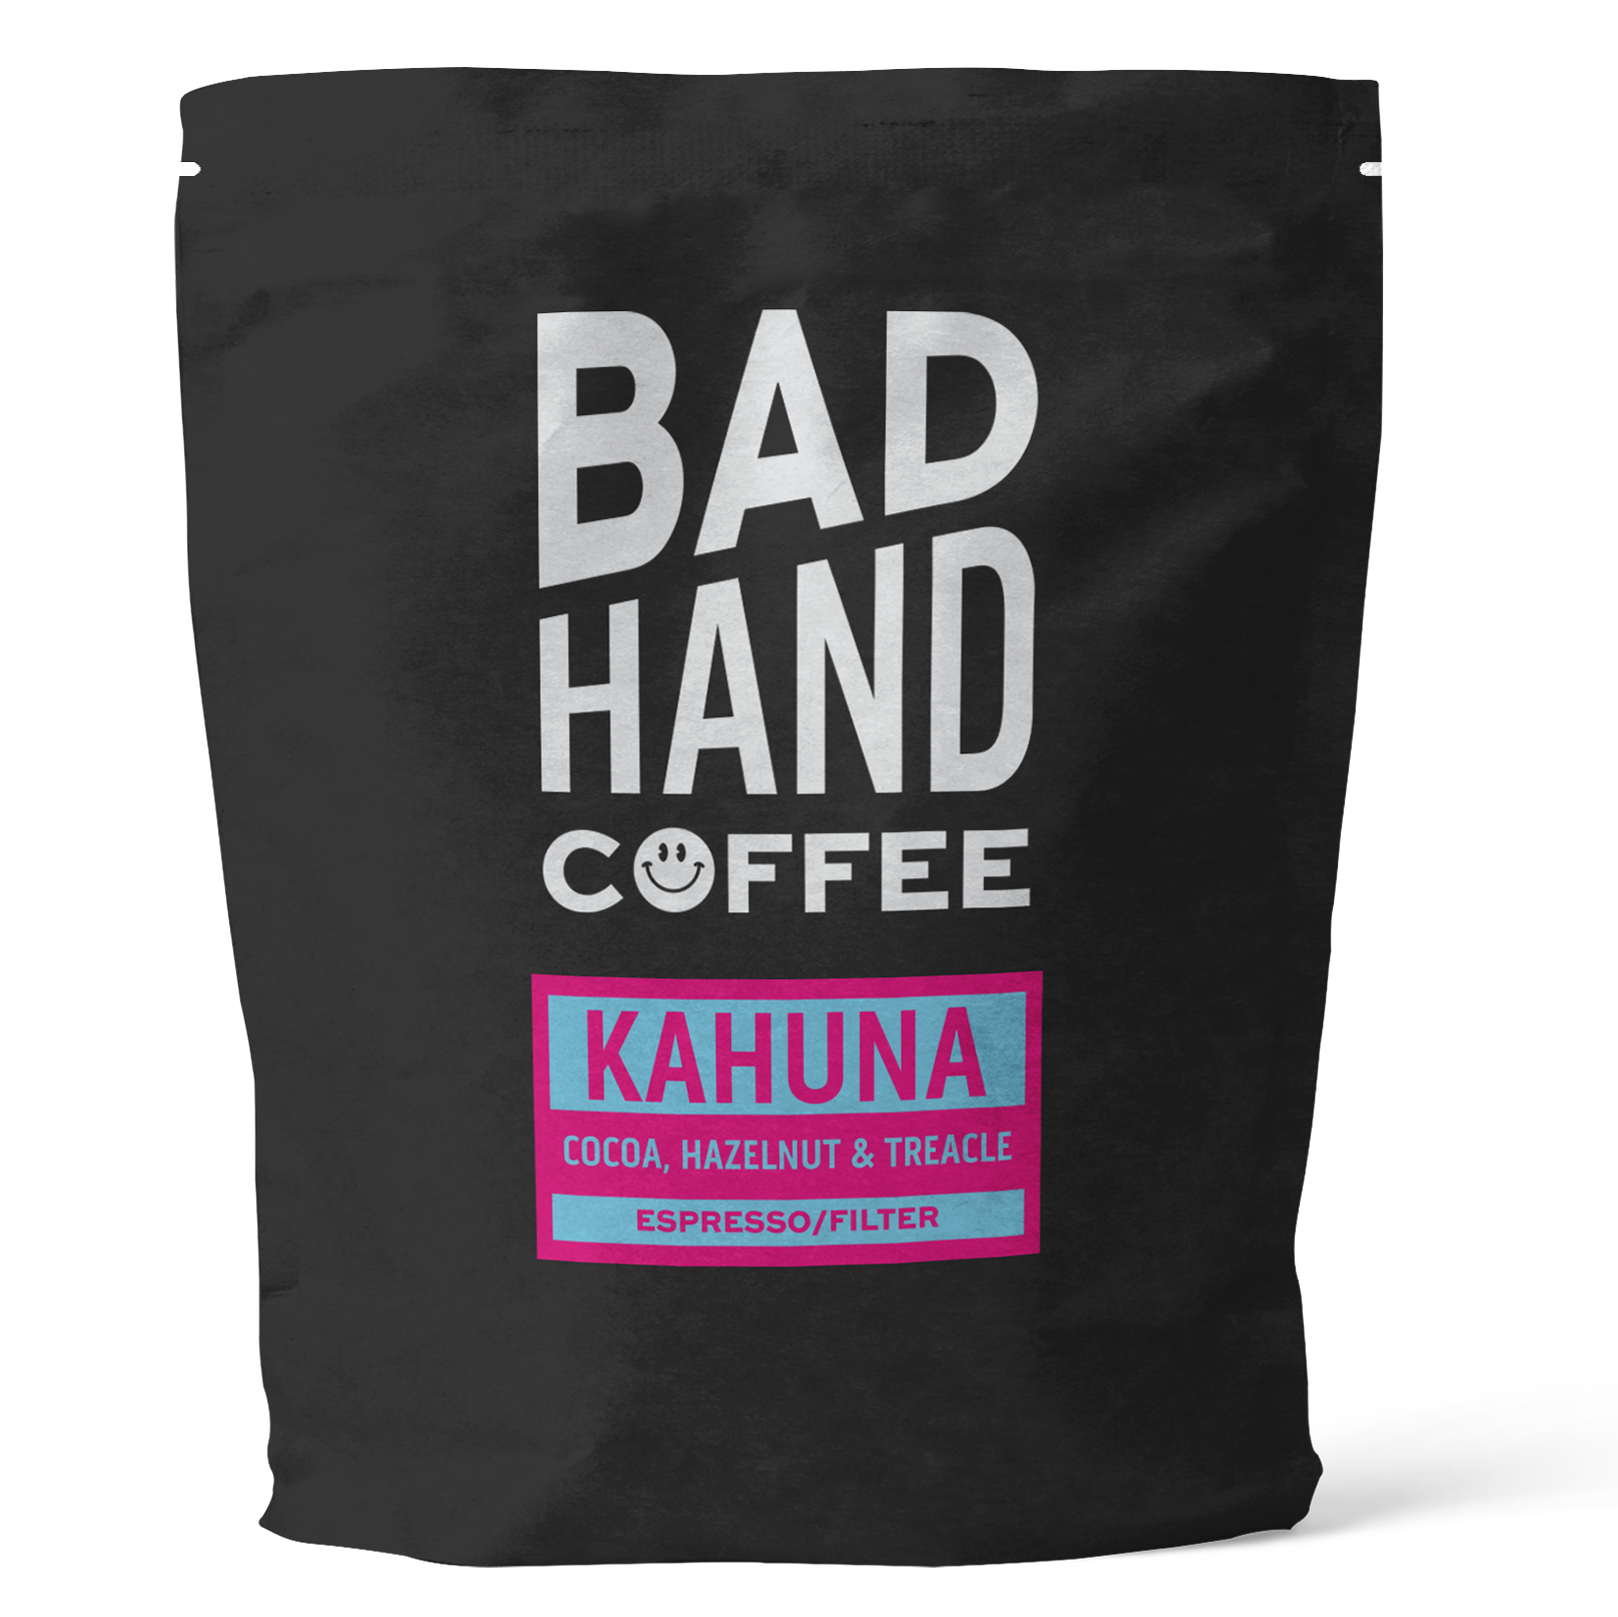 Kahuna Blend, espresso/filter coffee. Hazelnut & Cocoa, 250grams or 1kg, whole beans or ground.